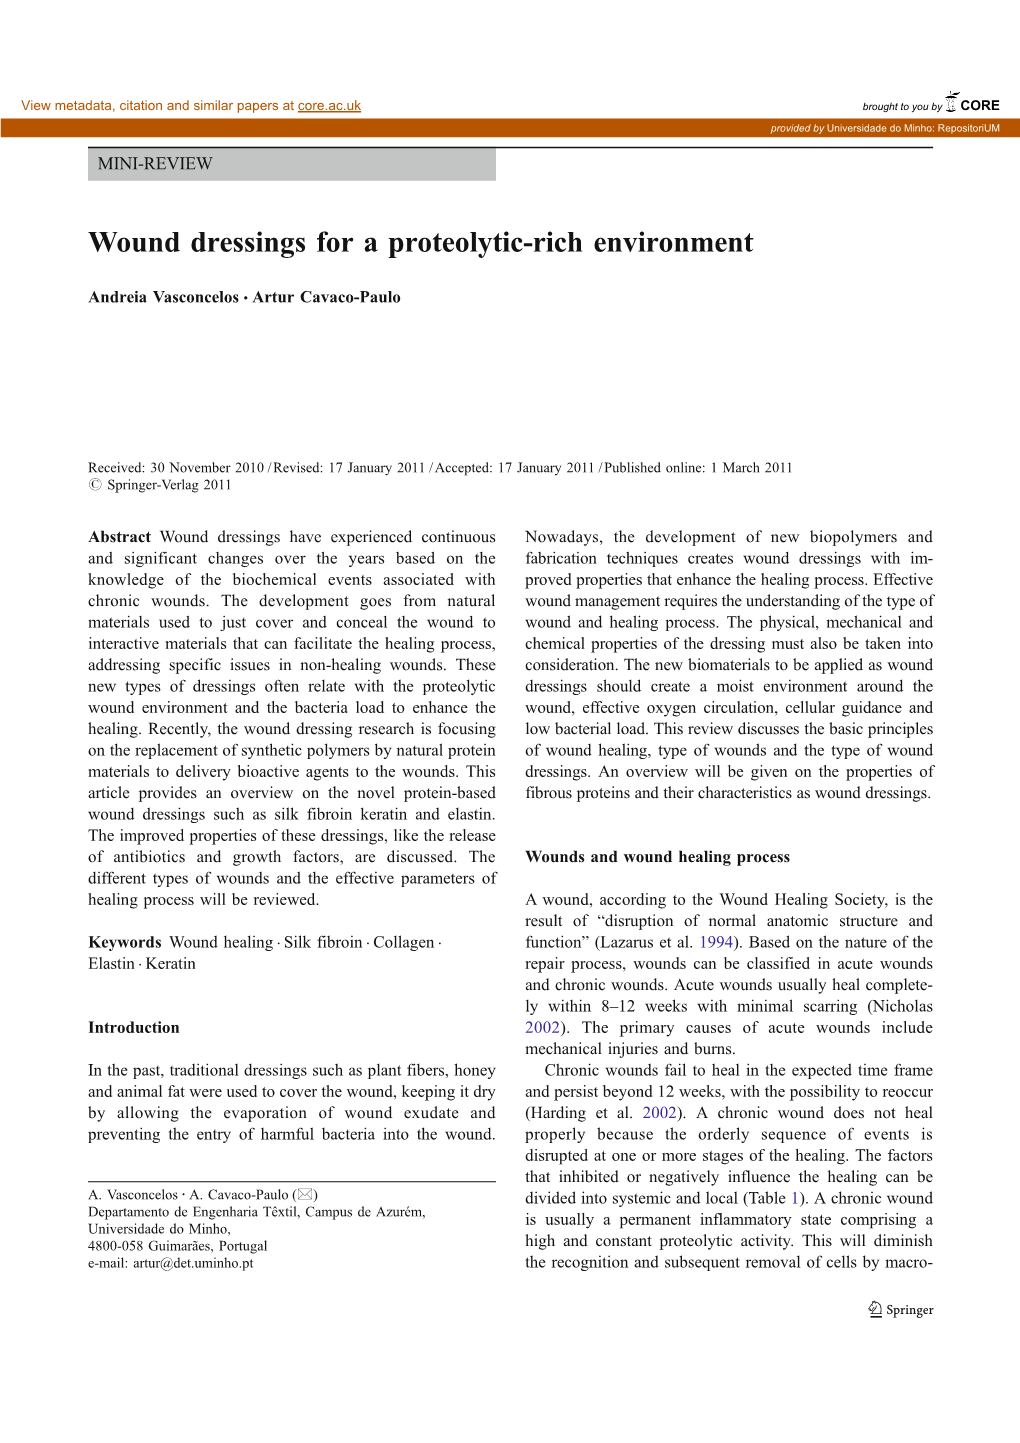 Wound Dressings for a Proteolytic-Rich Environment